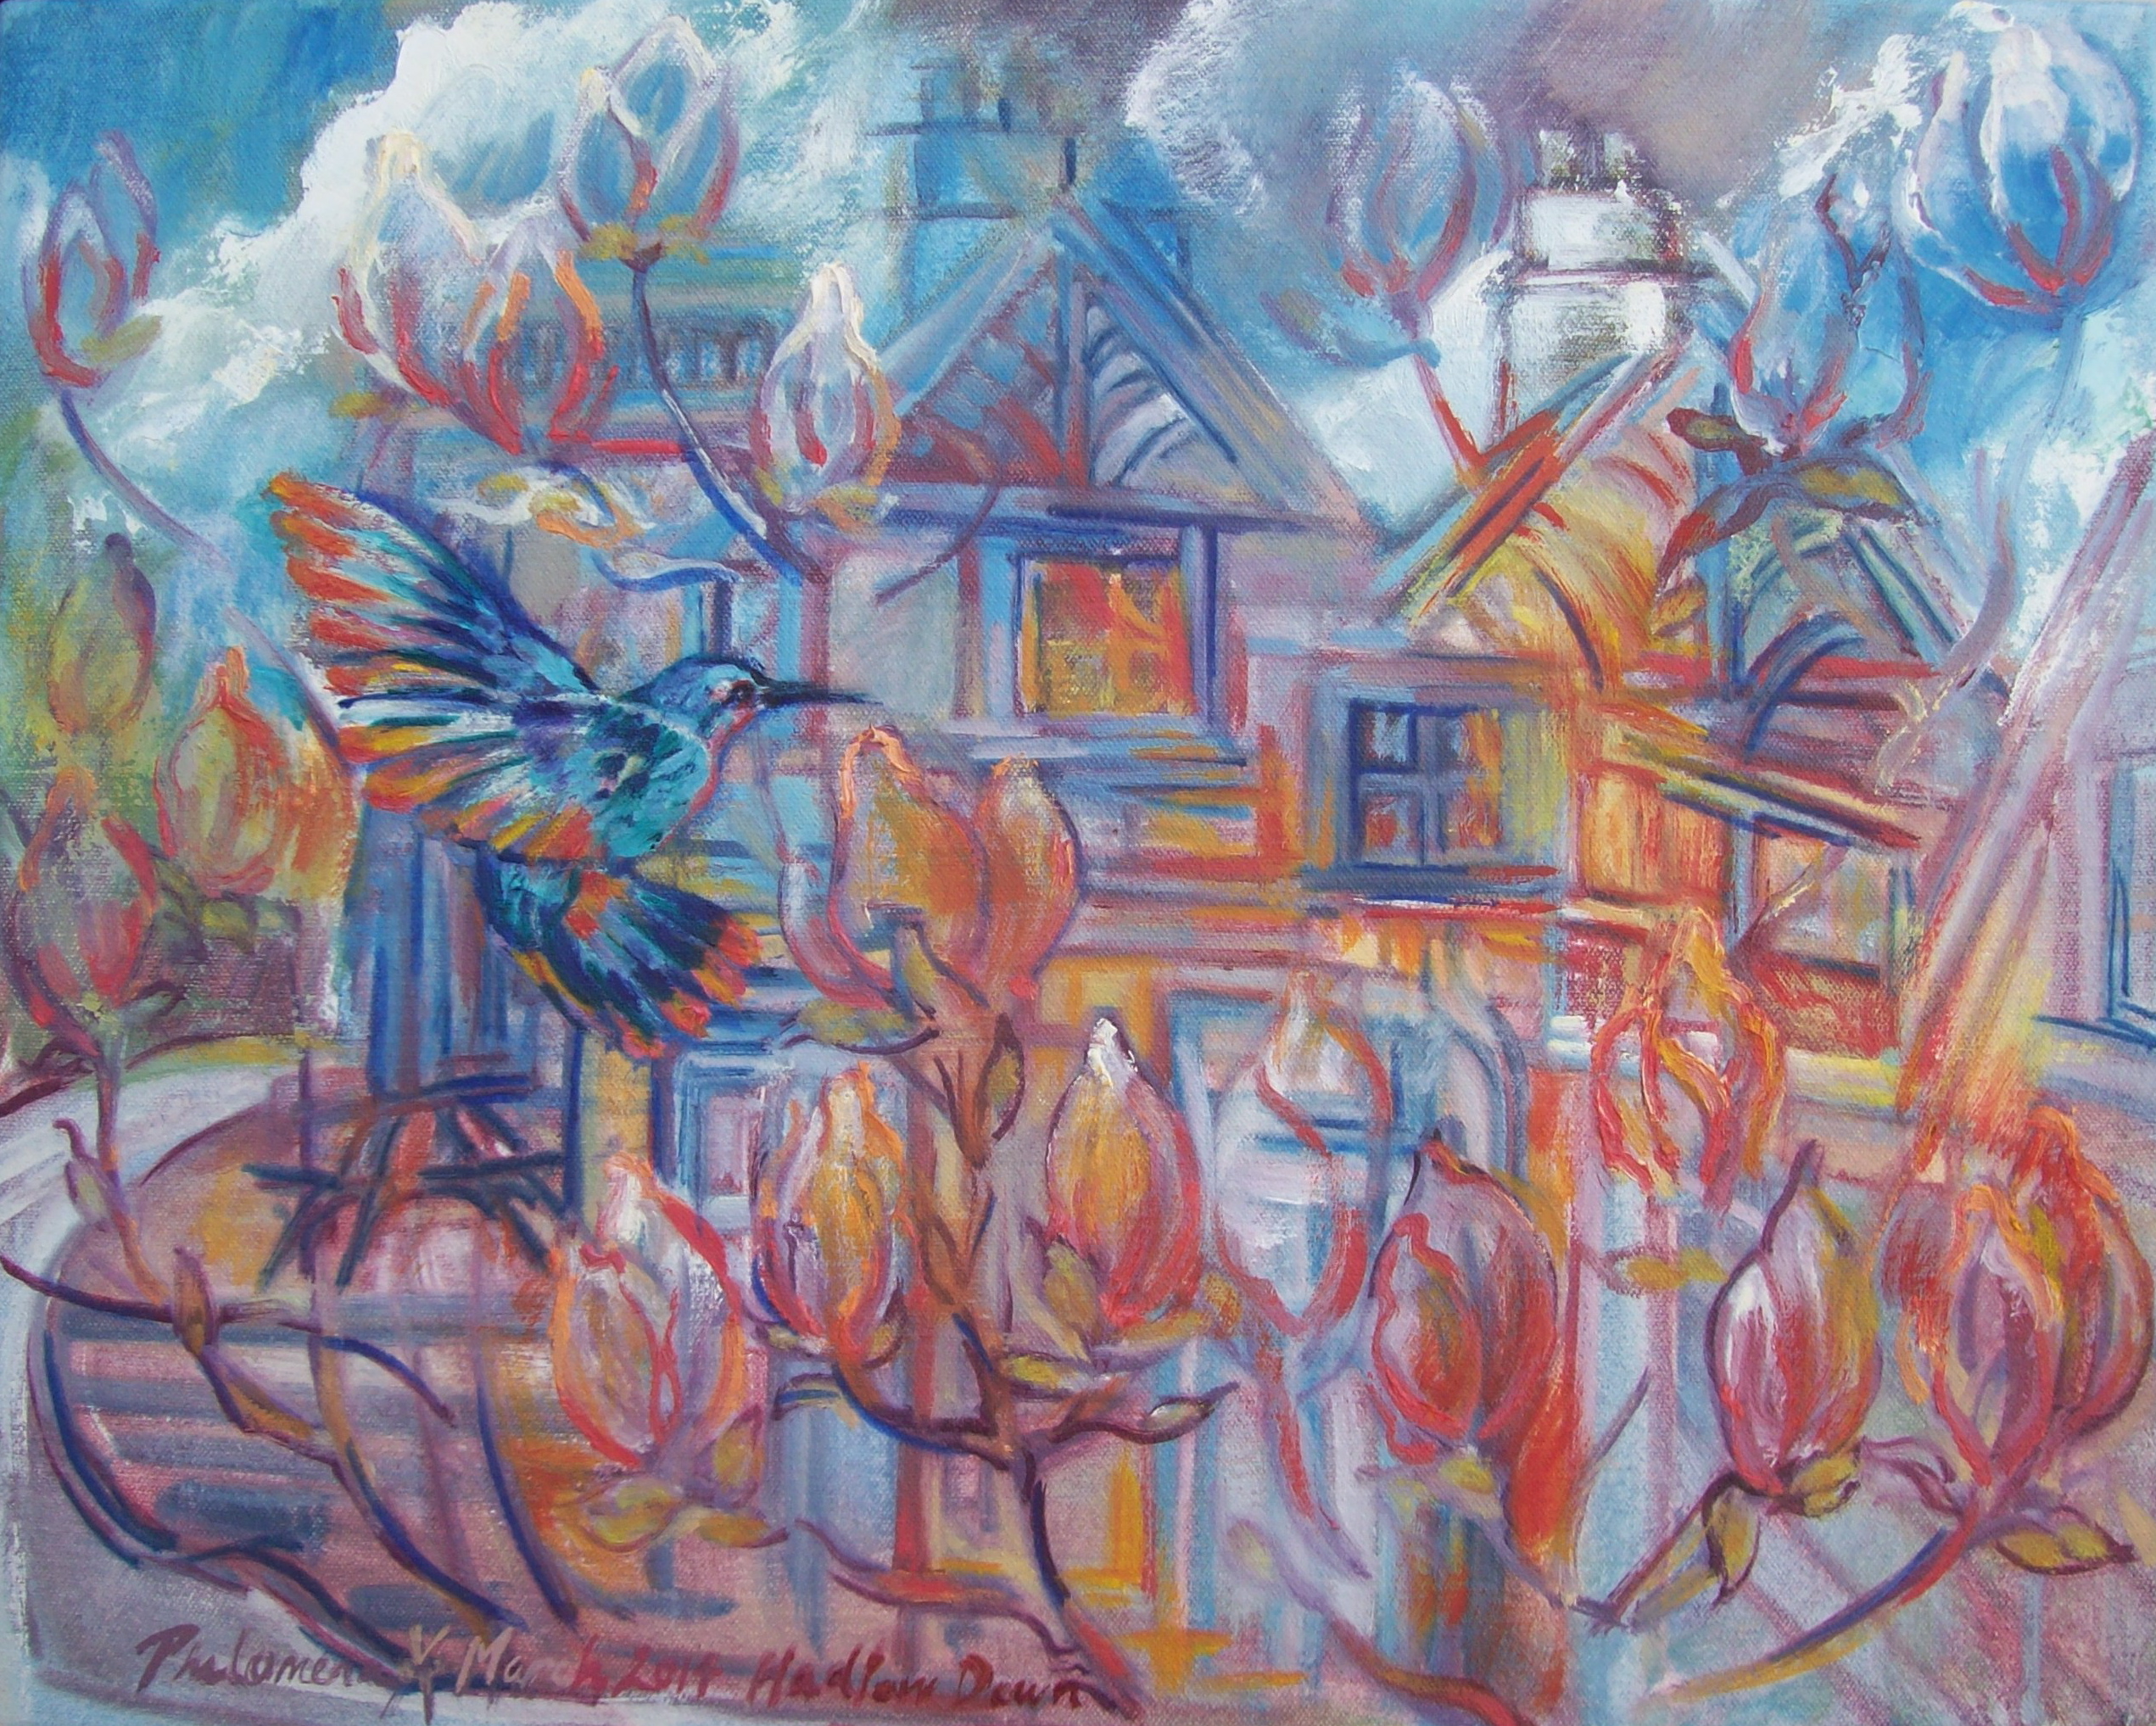 Flaming Magnolias, Hadlow Down (For Sale)